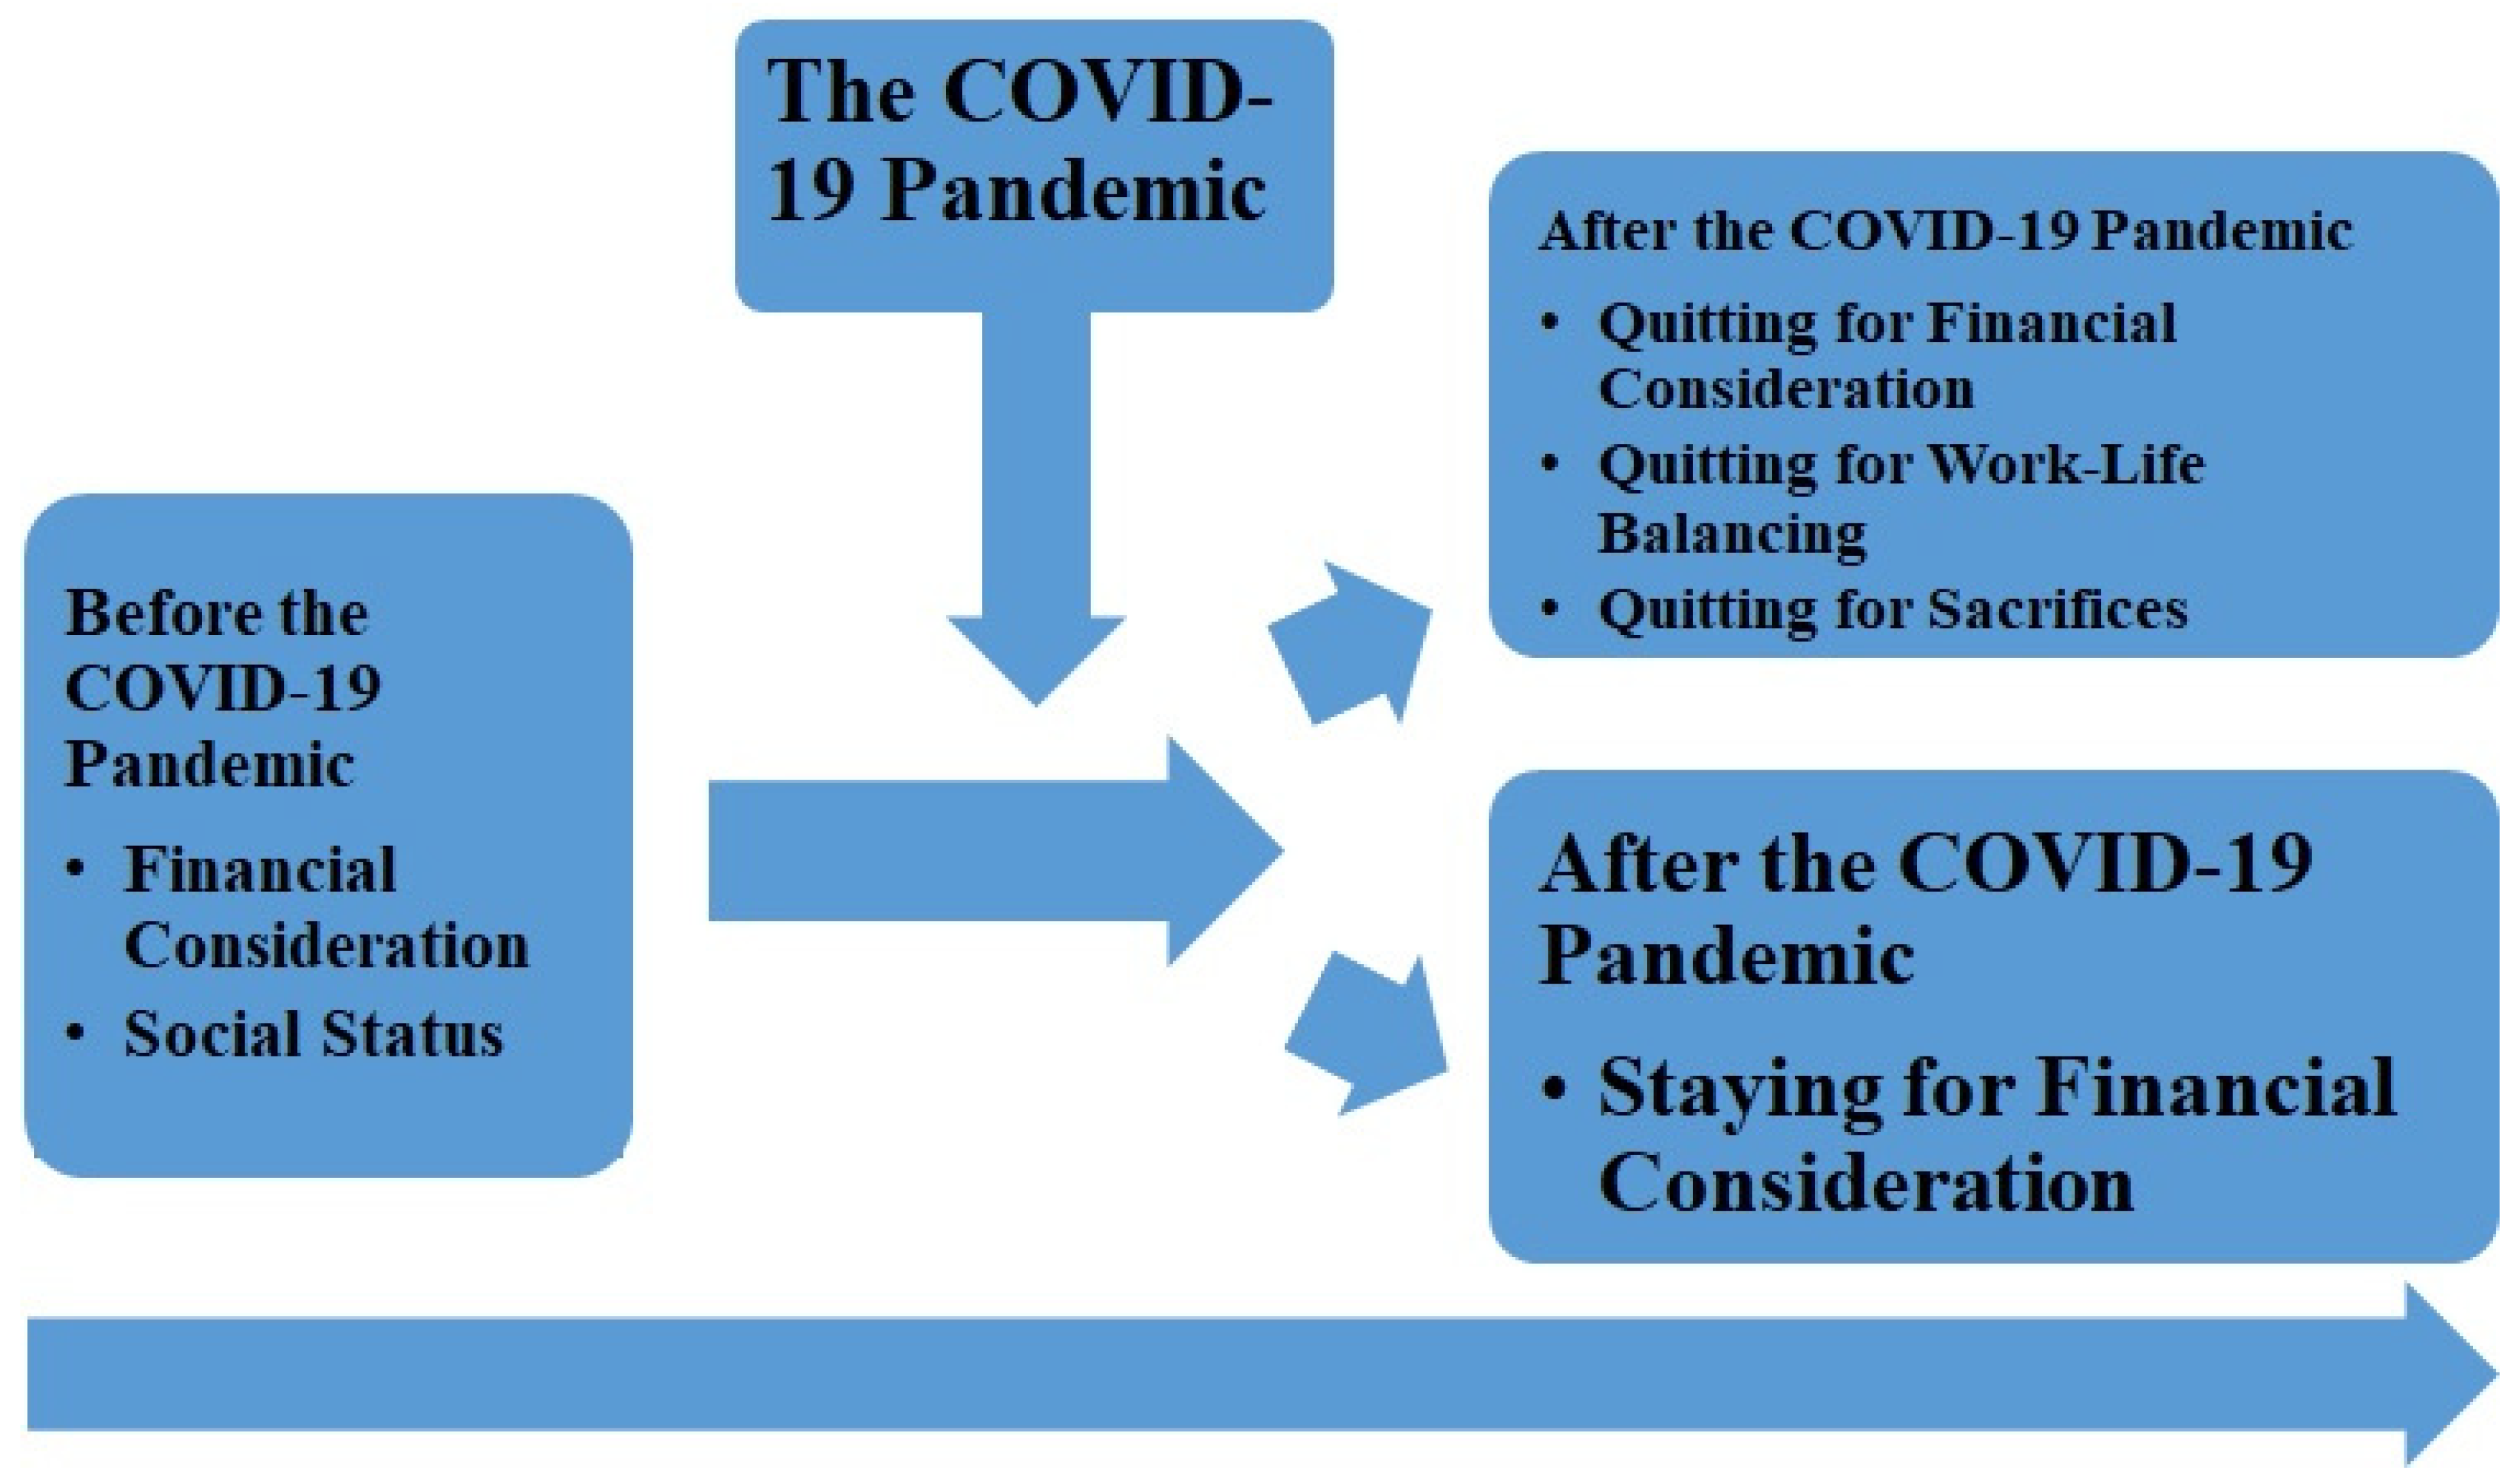 write a thesis statement about effects of covid 19 pandemic in the society